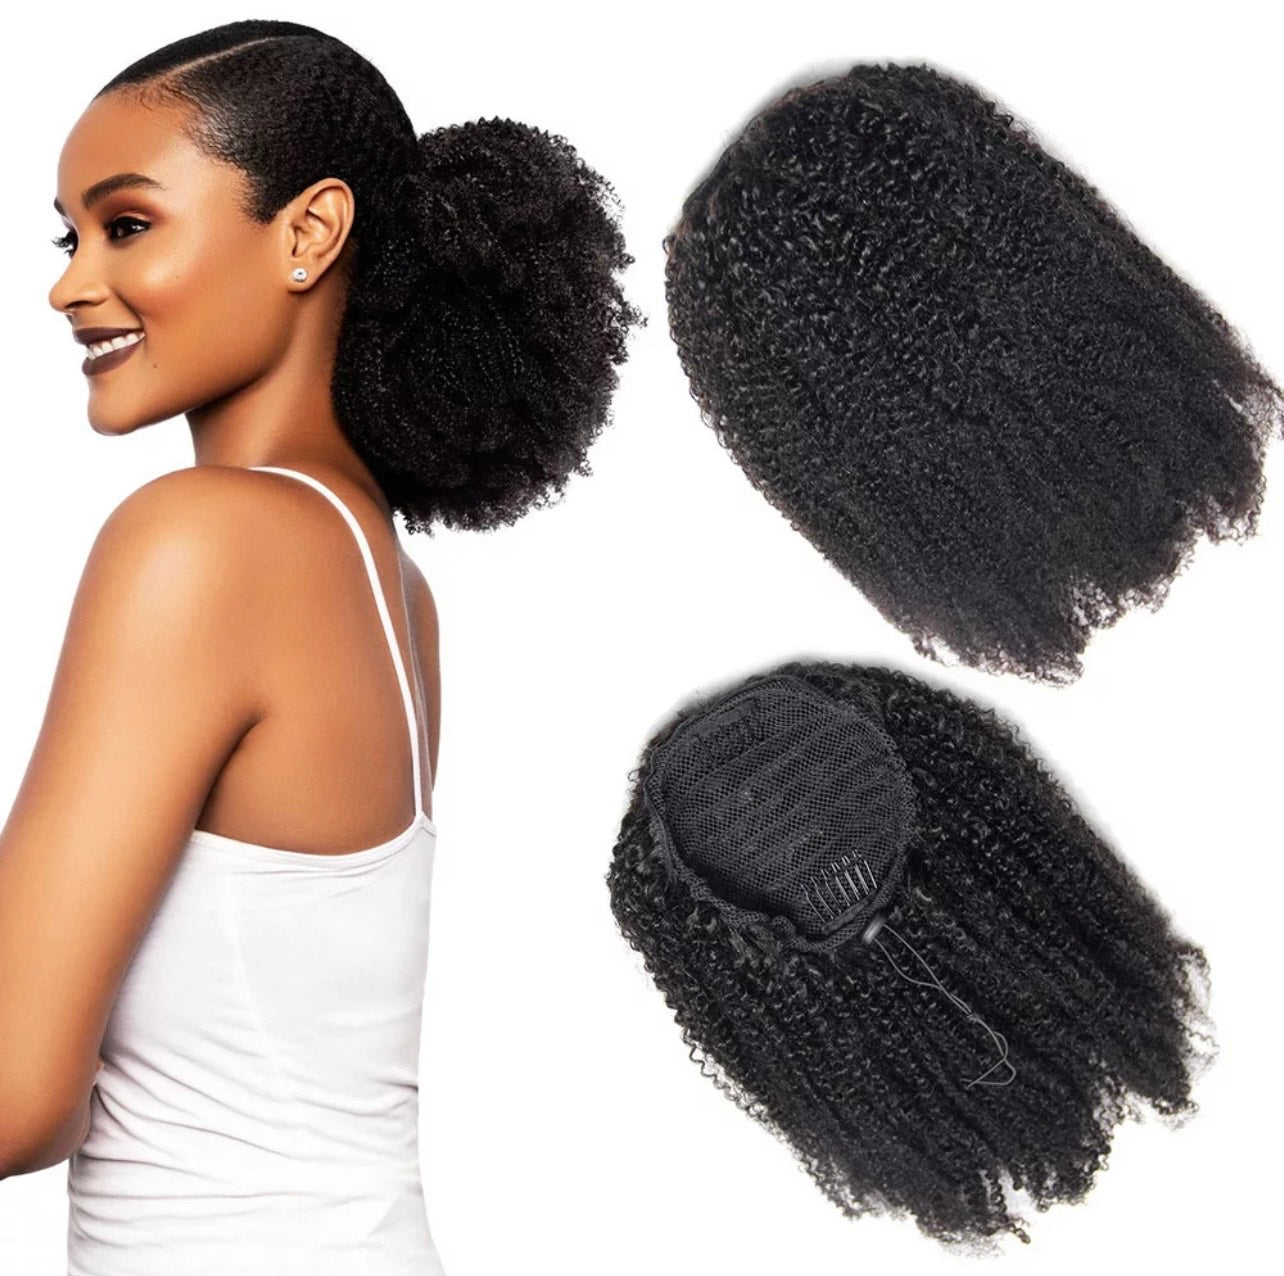 NATURAL AFRO  CURLY PONYTAIL 14 INCHES